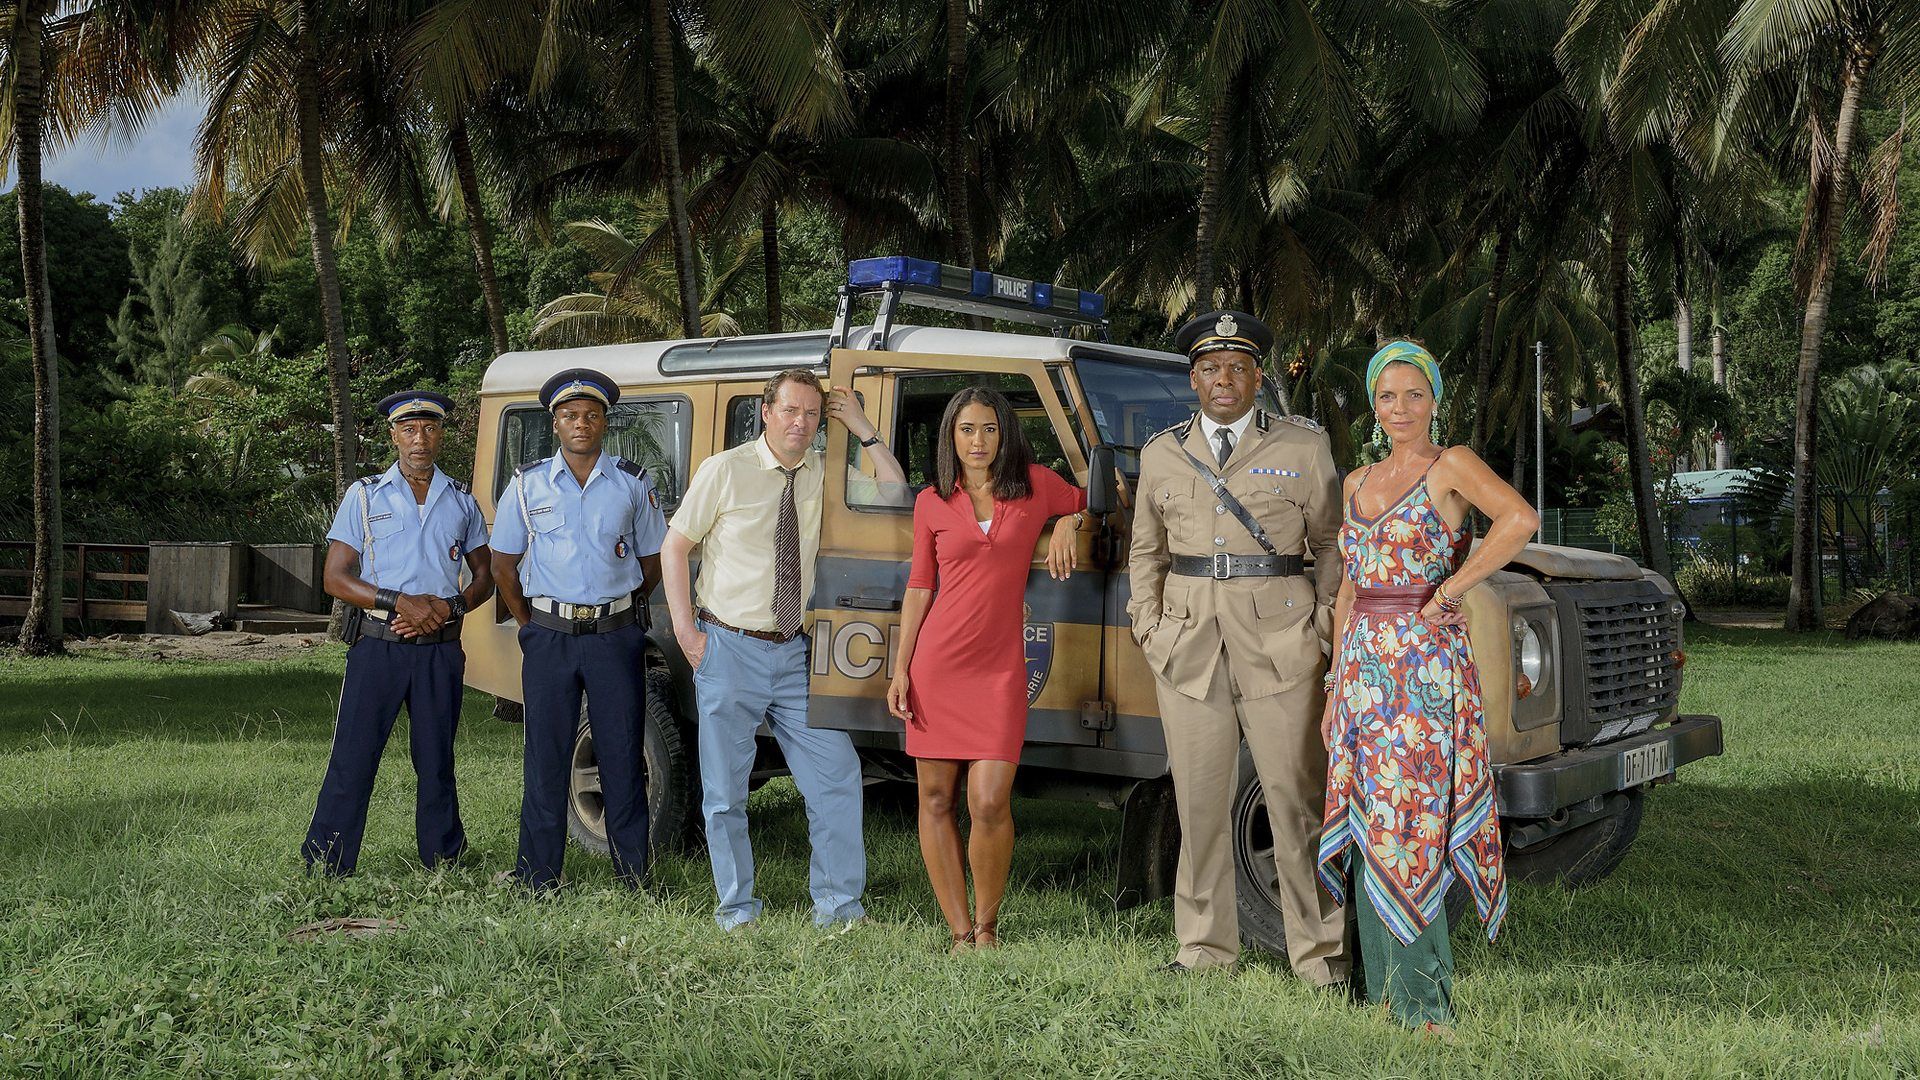 Death in Paradise Image #349095 TVmaze.